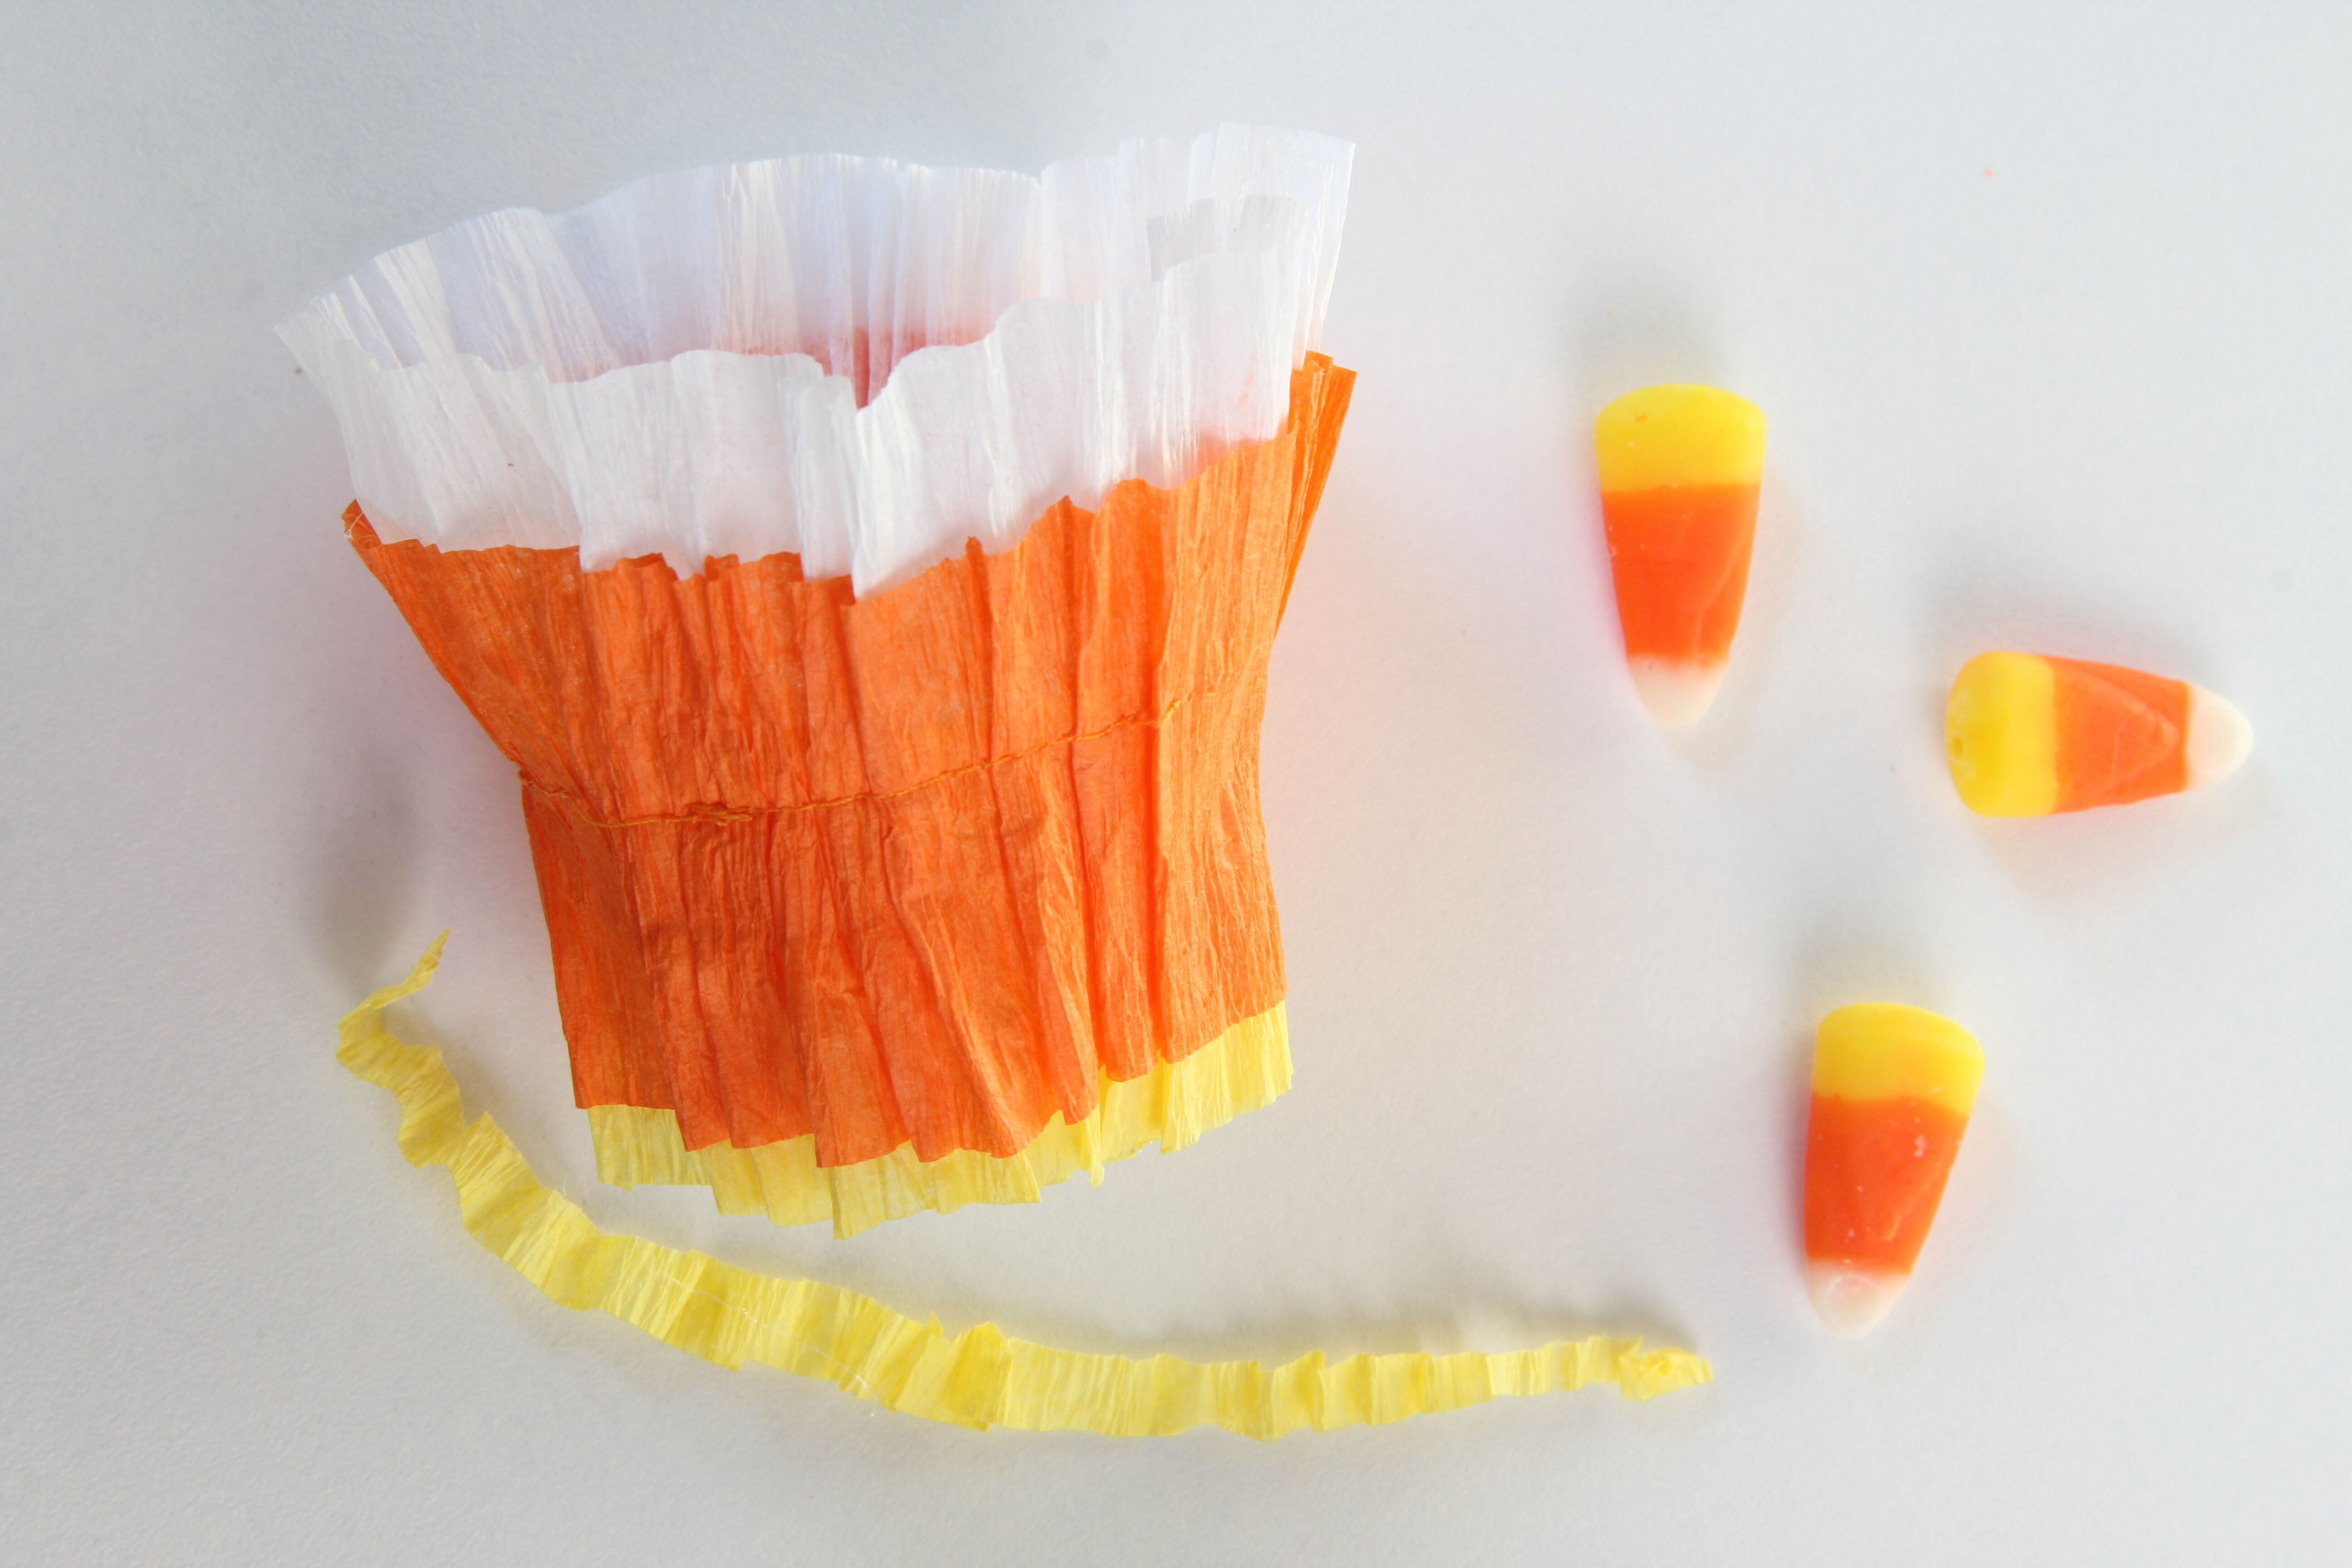 Cut any overhanging paper from the assembled DIY candy Corn Baskets. That way they can stand flat on a table.